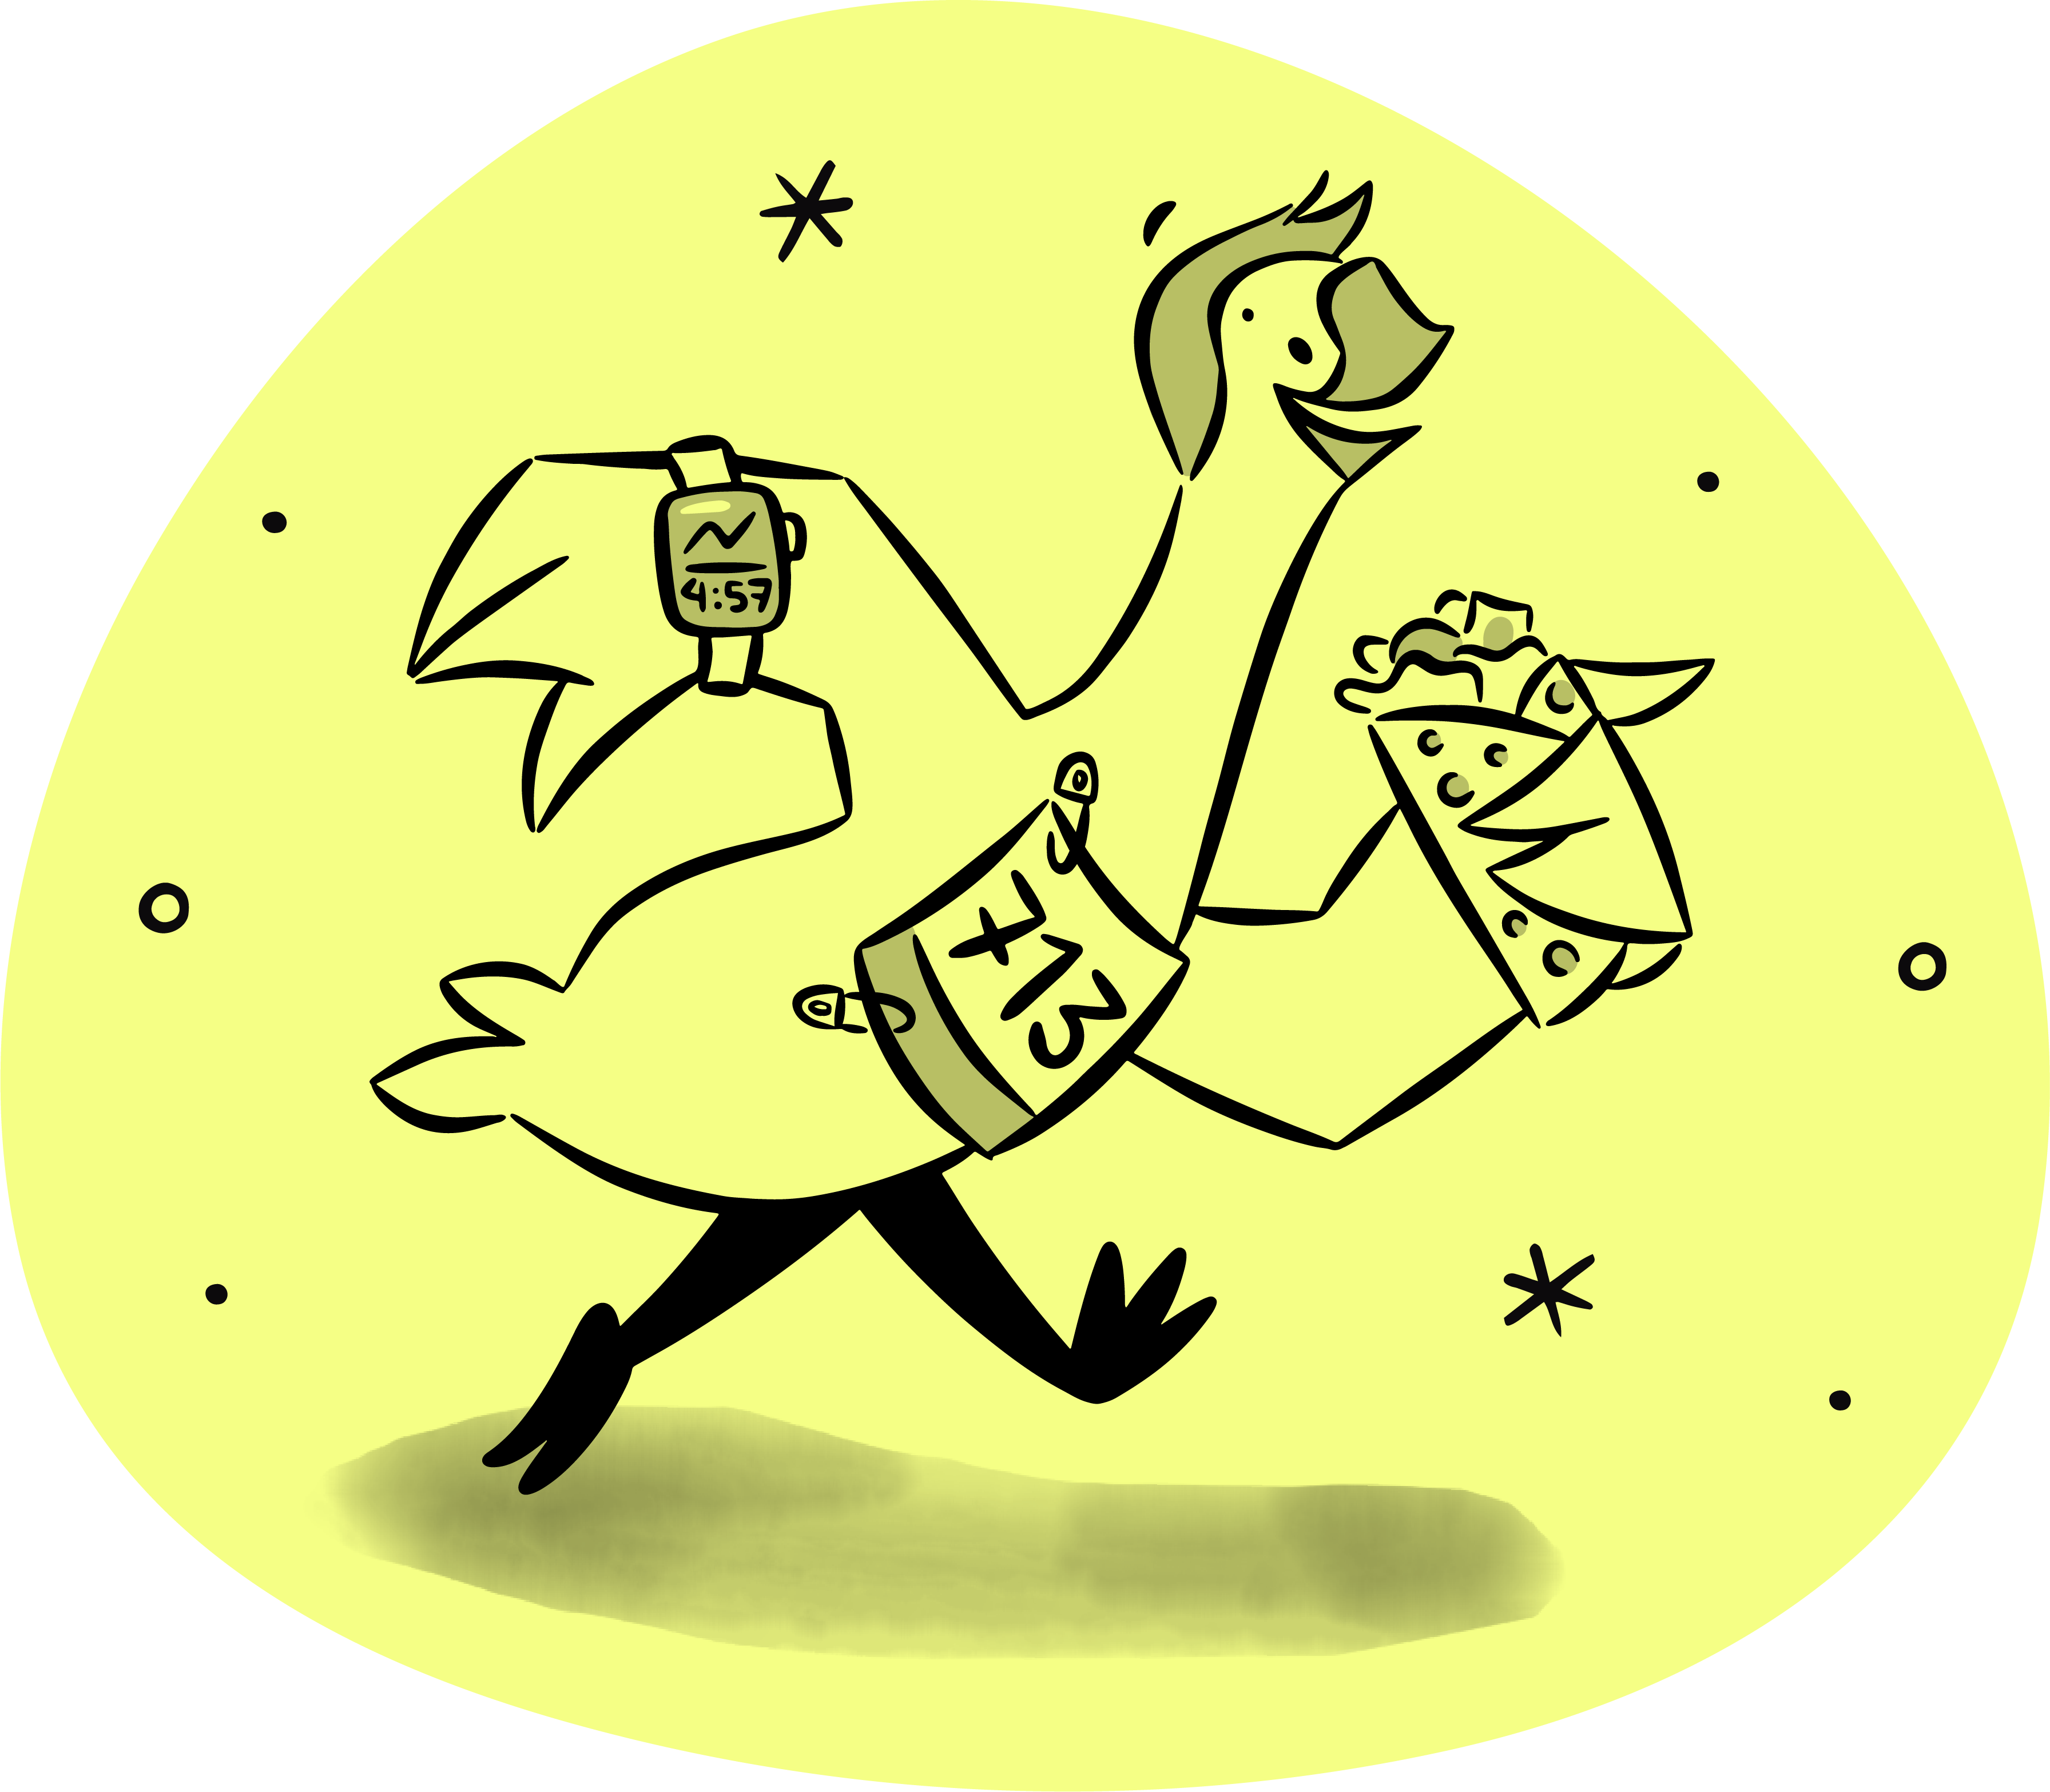 A running goose wearing a marathon race bib and holding a large burrito